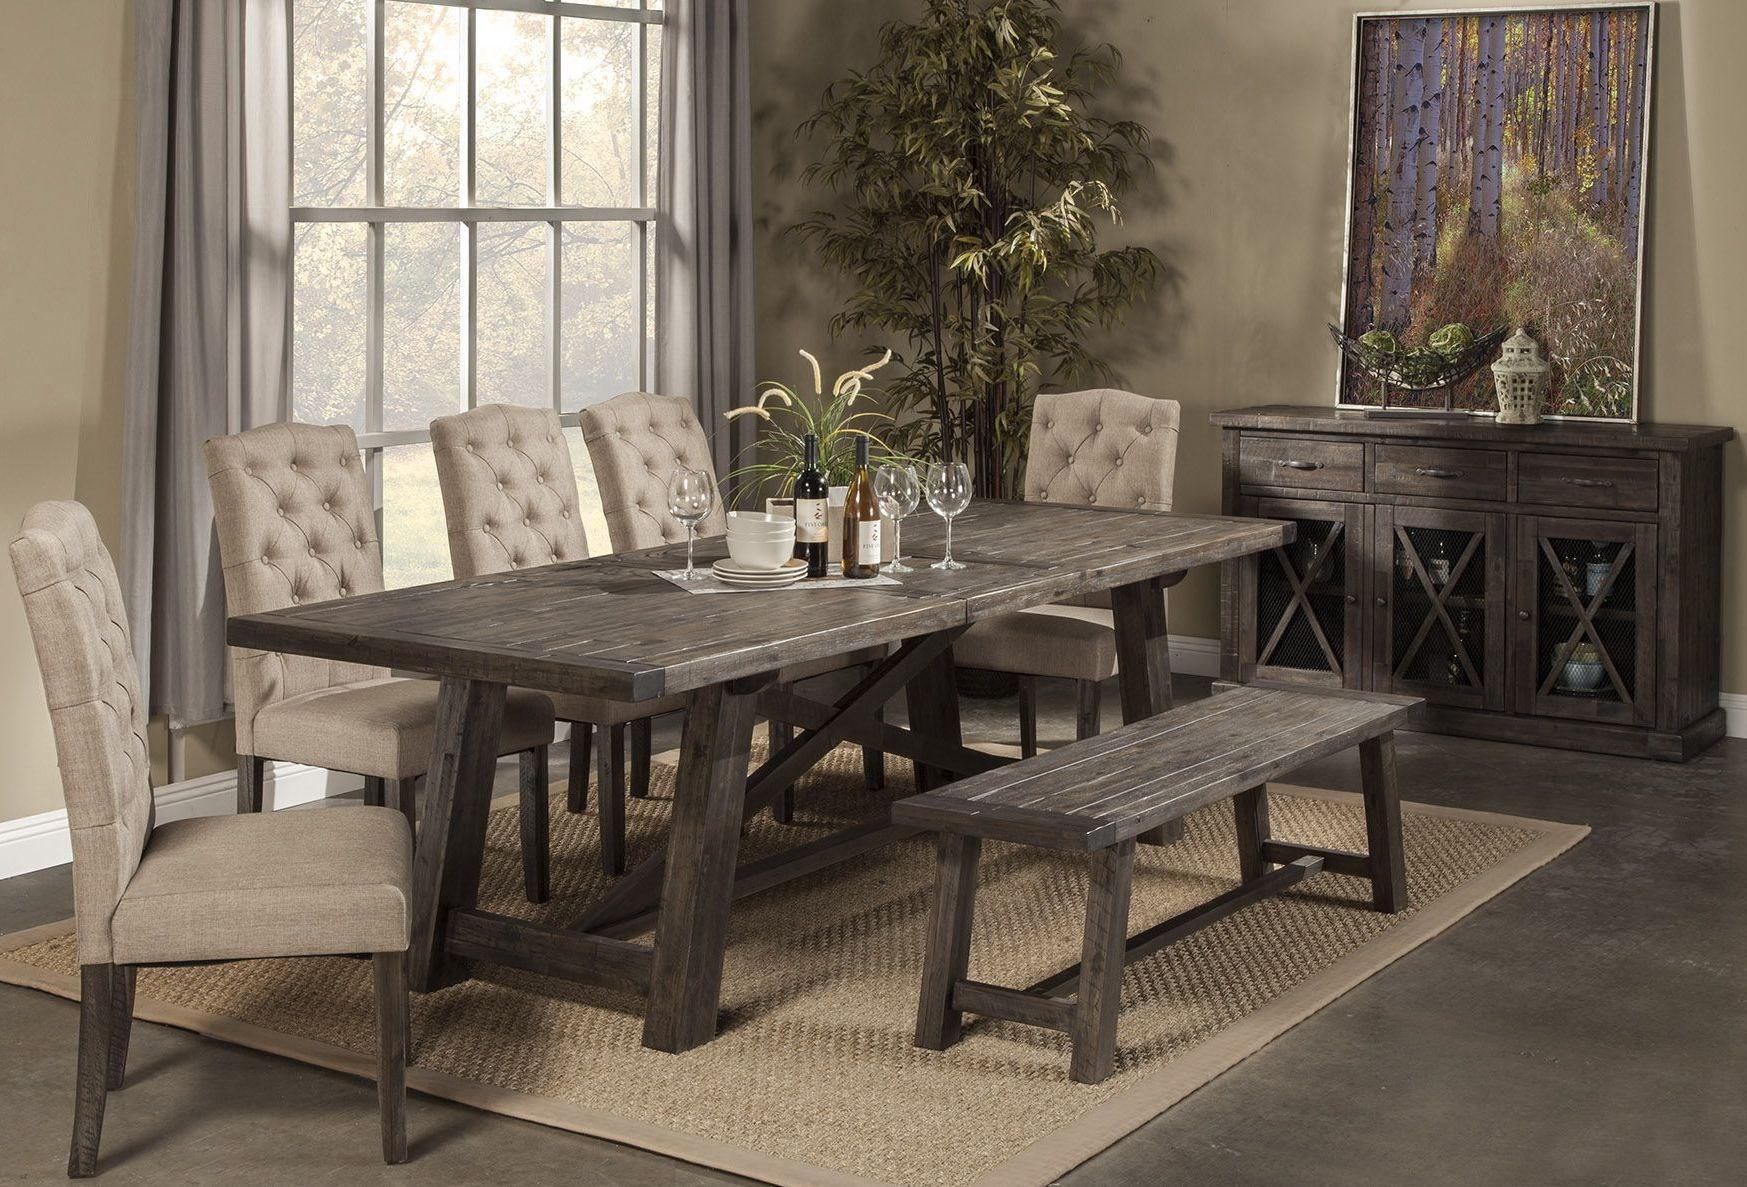 Traditional Dining Table Set NEWBERRY 1468-22-Set-8 in Cream, Gray Fabric